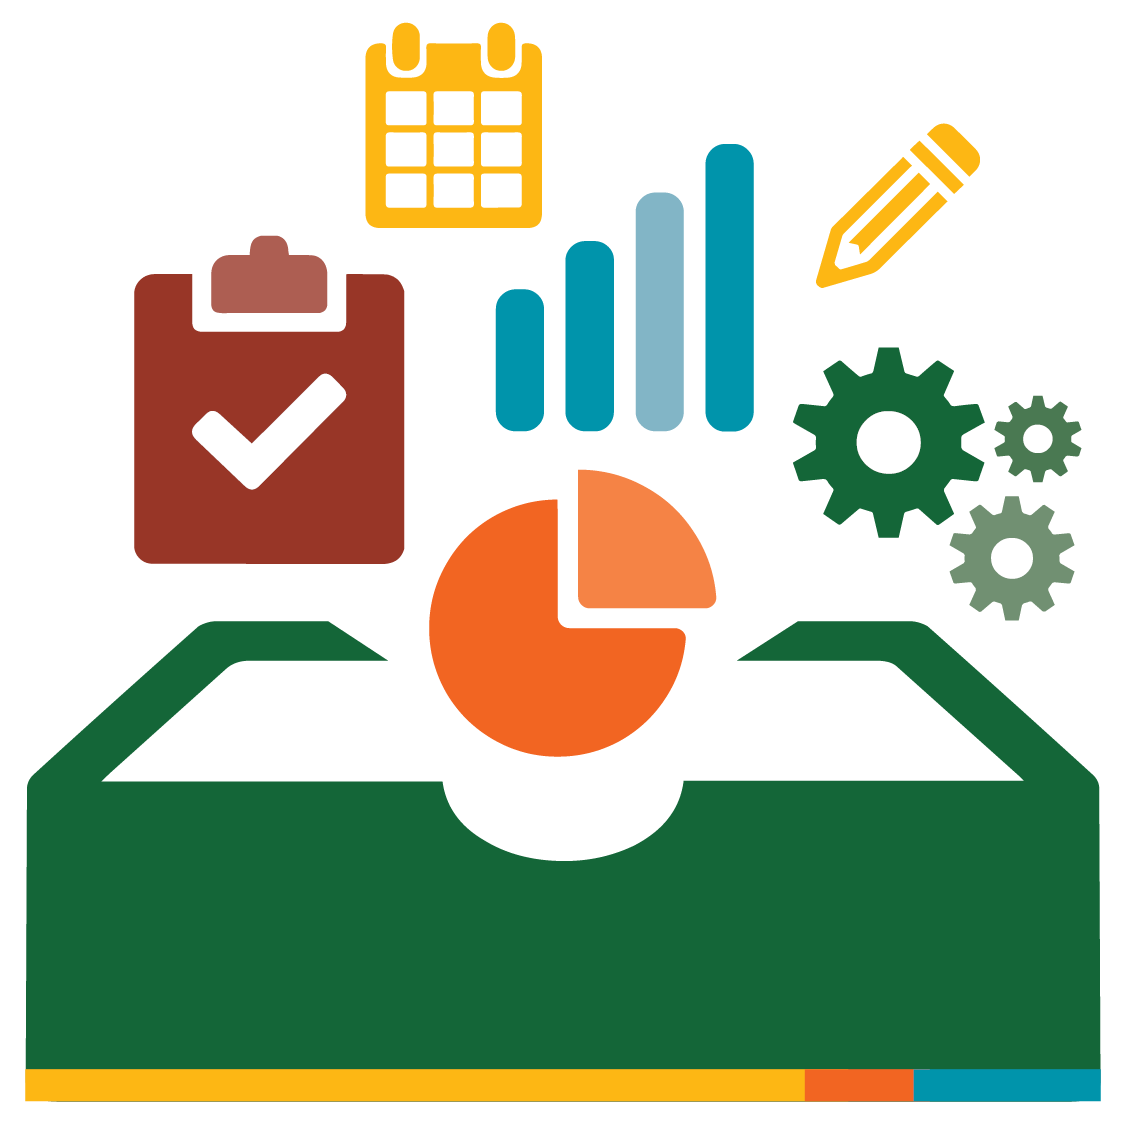 Clipart graphic of a toolbox containing charts, a calendar, and a pencil